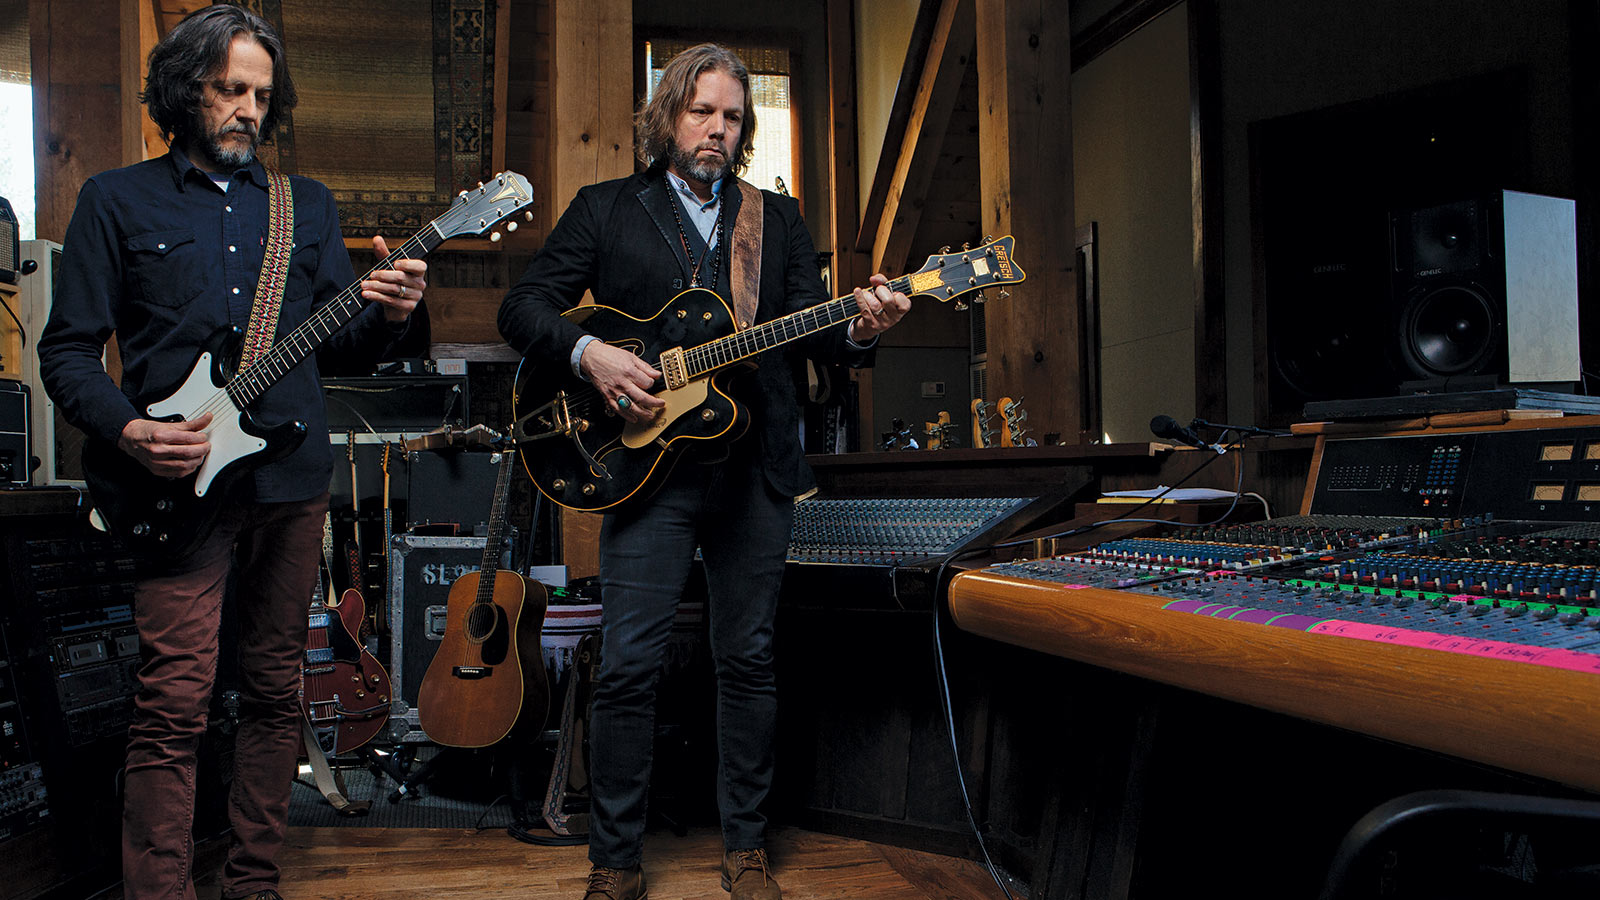 Former black crowes rich robinson and marc ford discuss the magpie salutes new album high water i guitar world